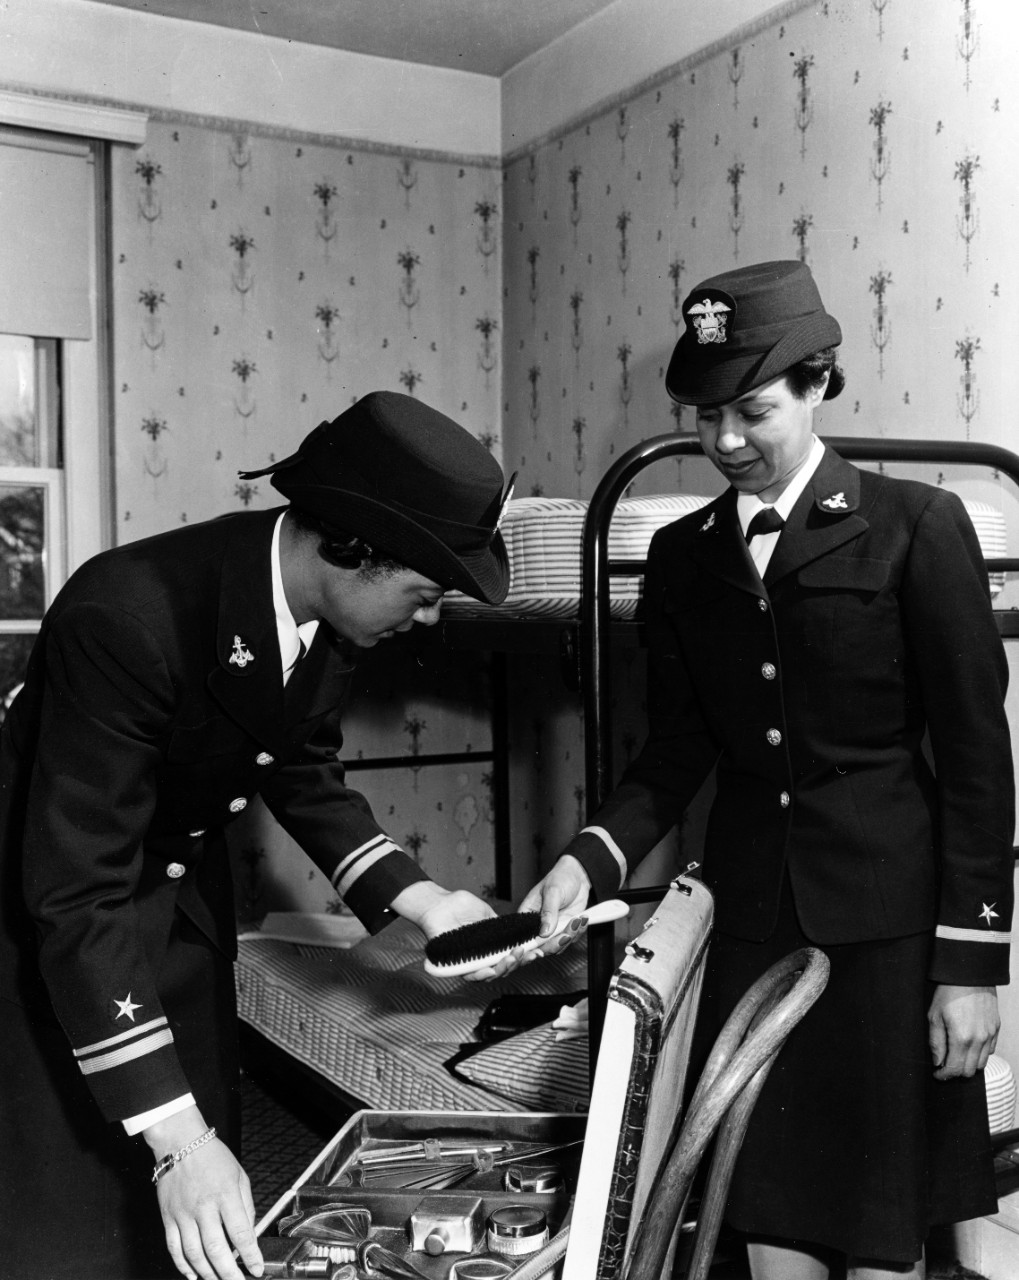 One female officer hands another a brush to pack in a suitcase